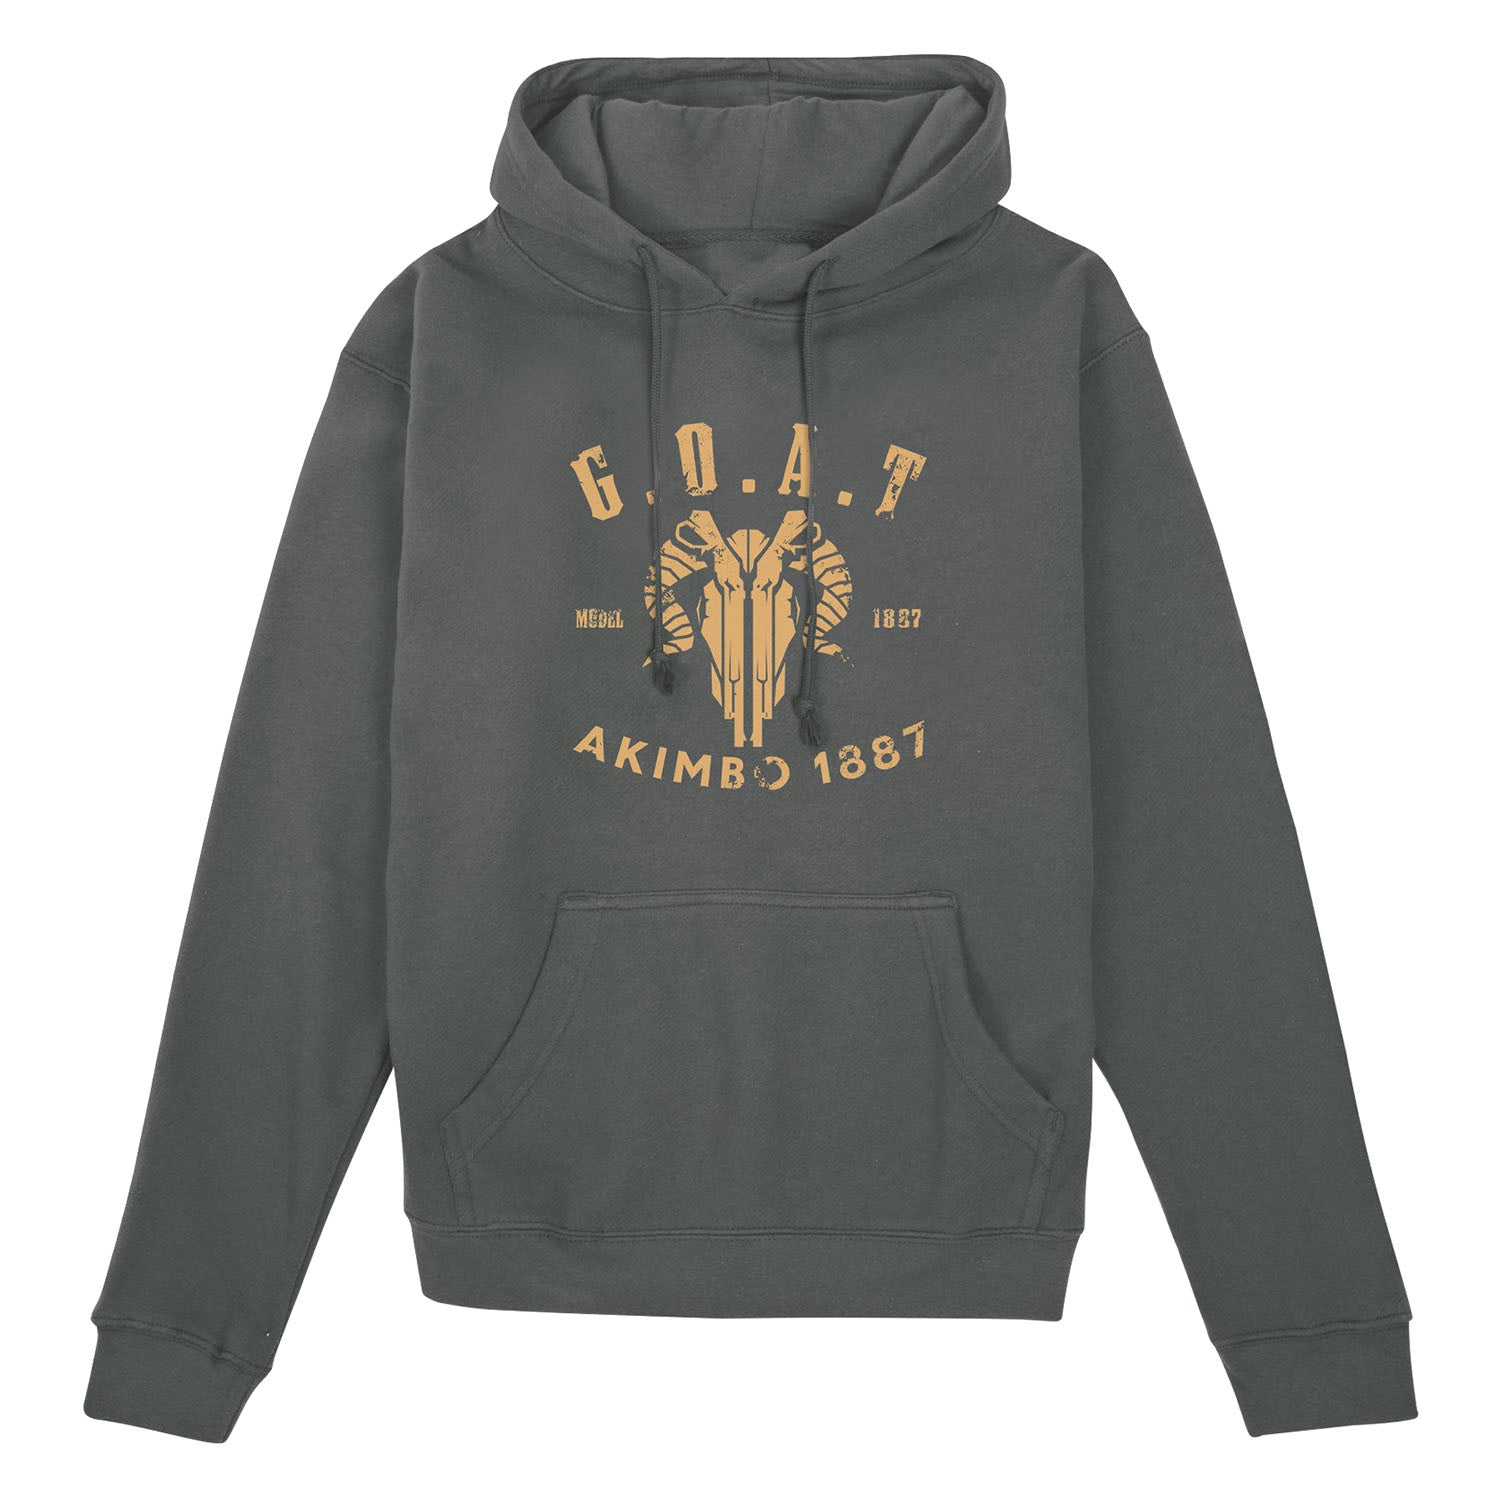 Call of Duty Olive Akimbo 1887 Hoodie - Front View